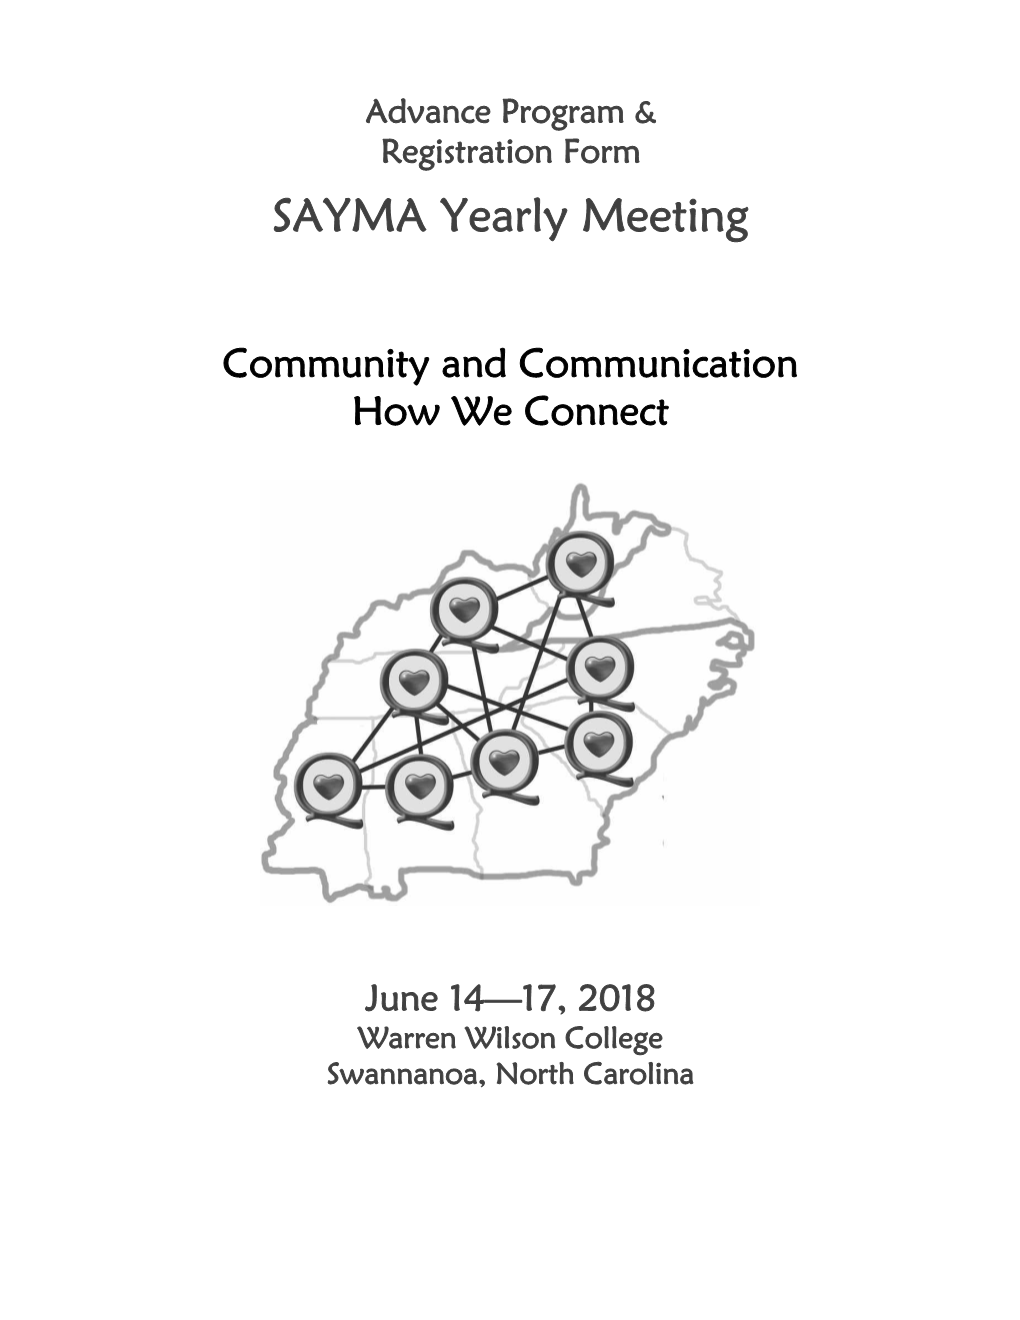 SAYMA Yearly Meeting